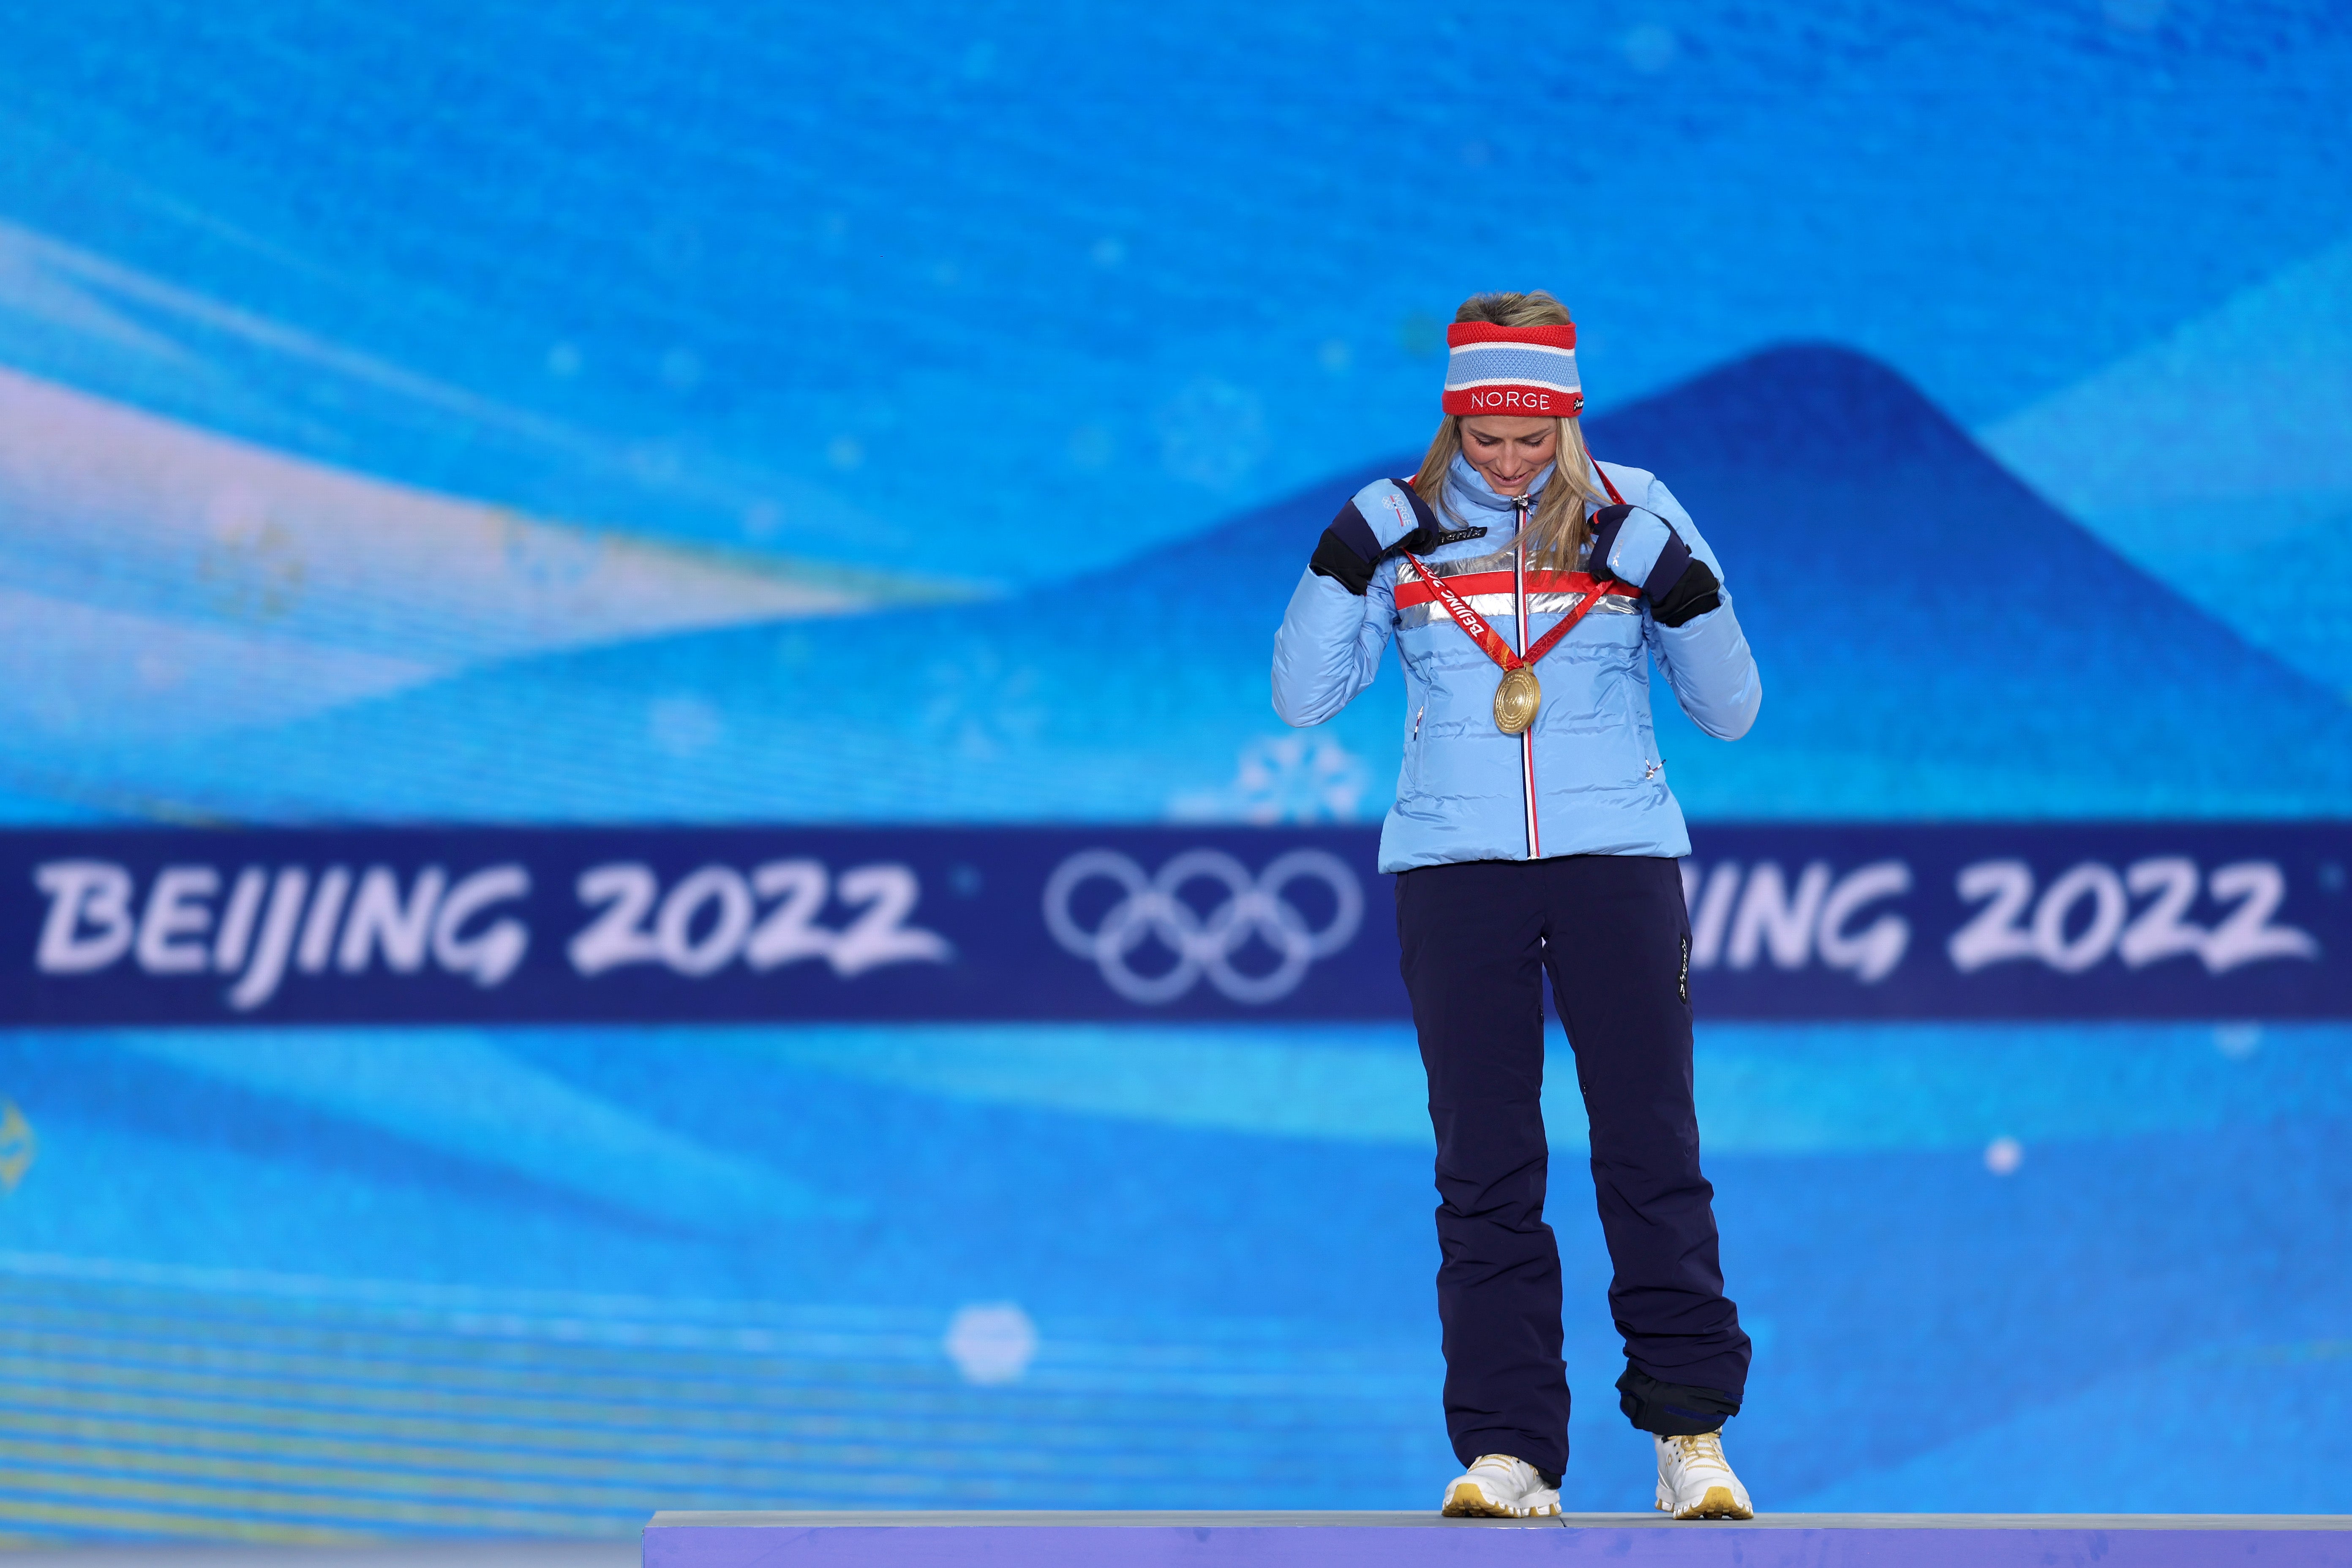 Gold medallist, Therese Johaug of Team Norway stands on the podium during the Women's 10km Classic medal ceremony on Day 6 of the Beijing 2022 Winter Olympic Games